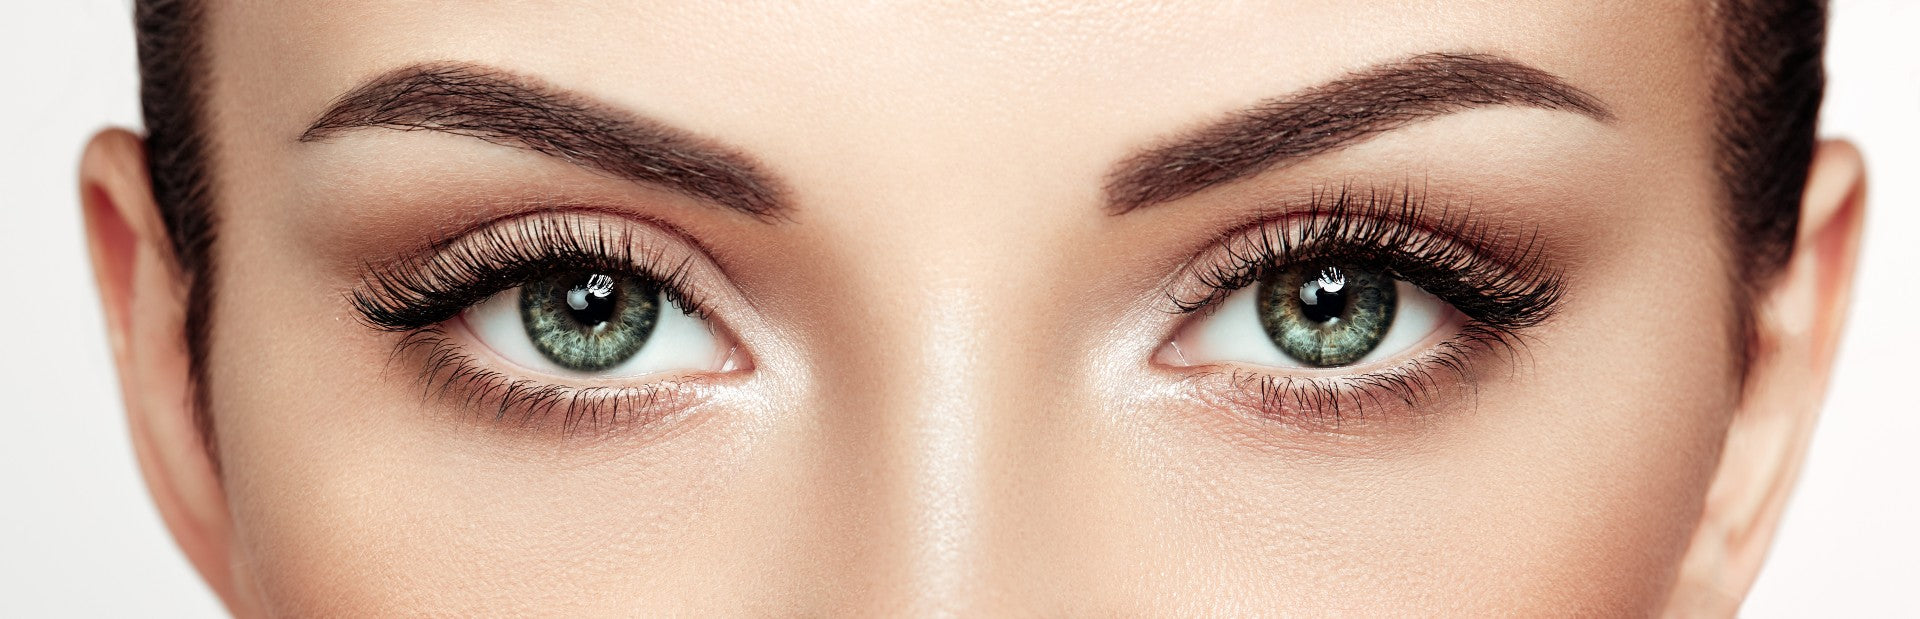 Why Do People Wear Cosmetic Contact Lenses?